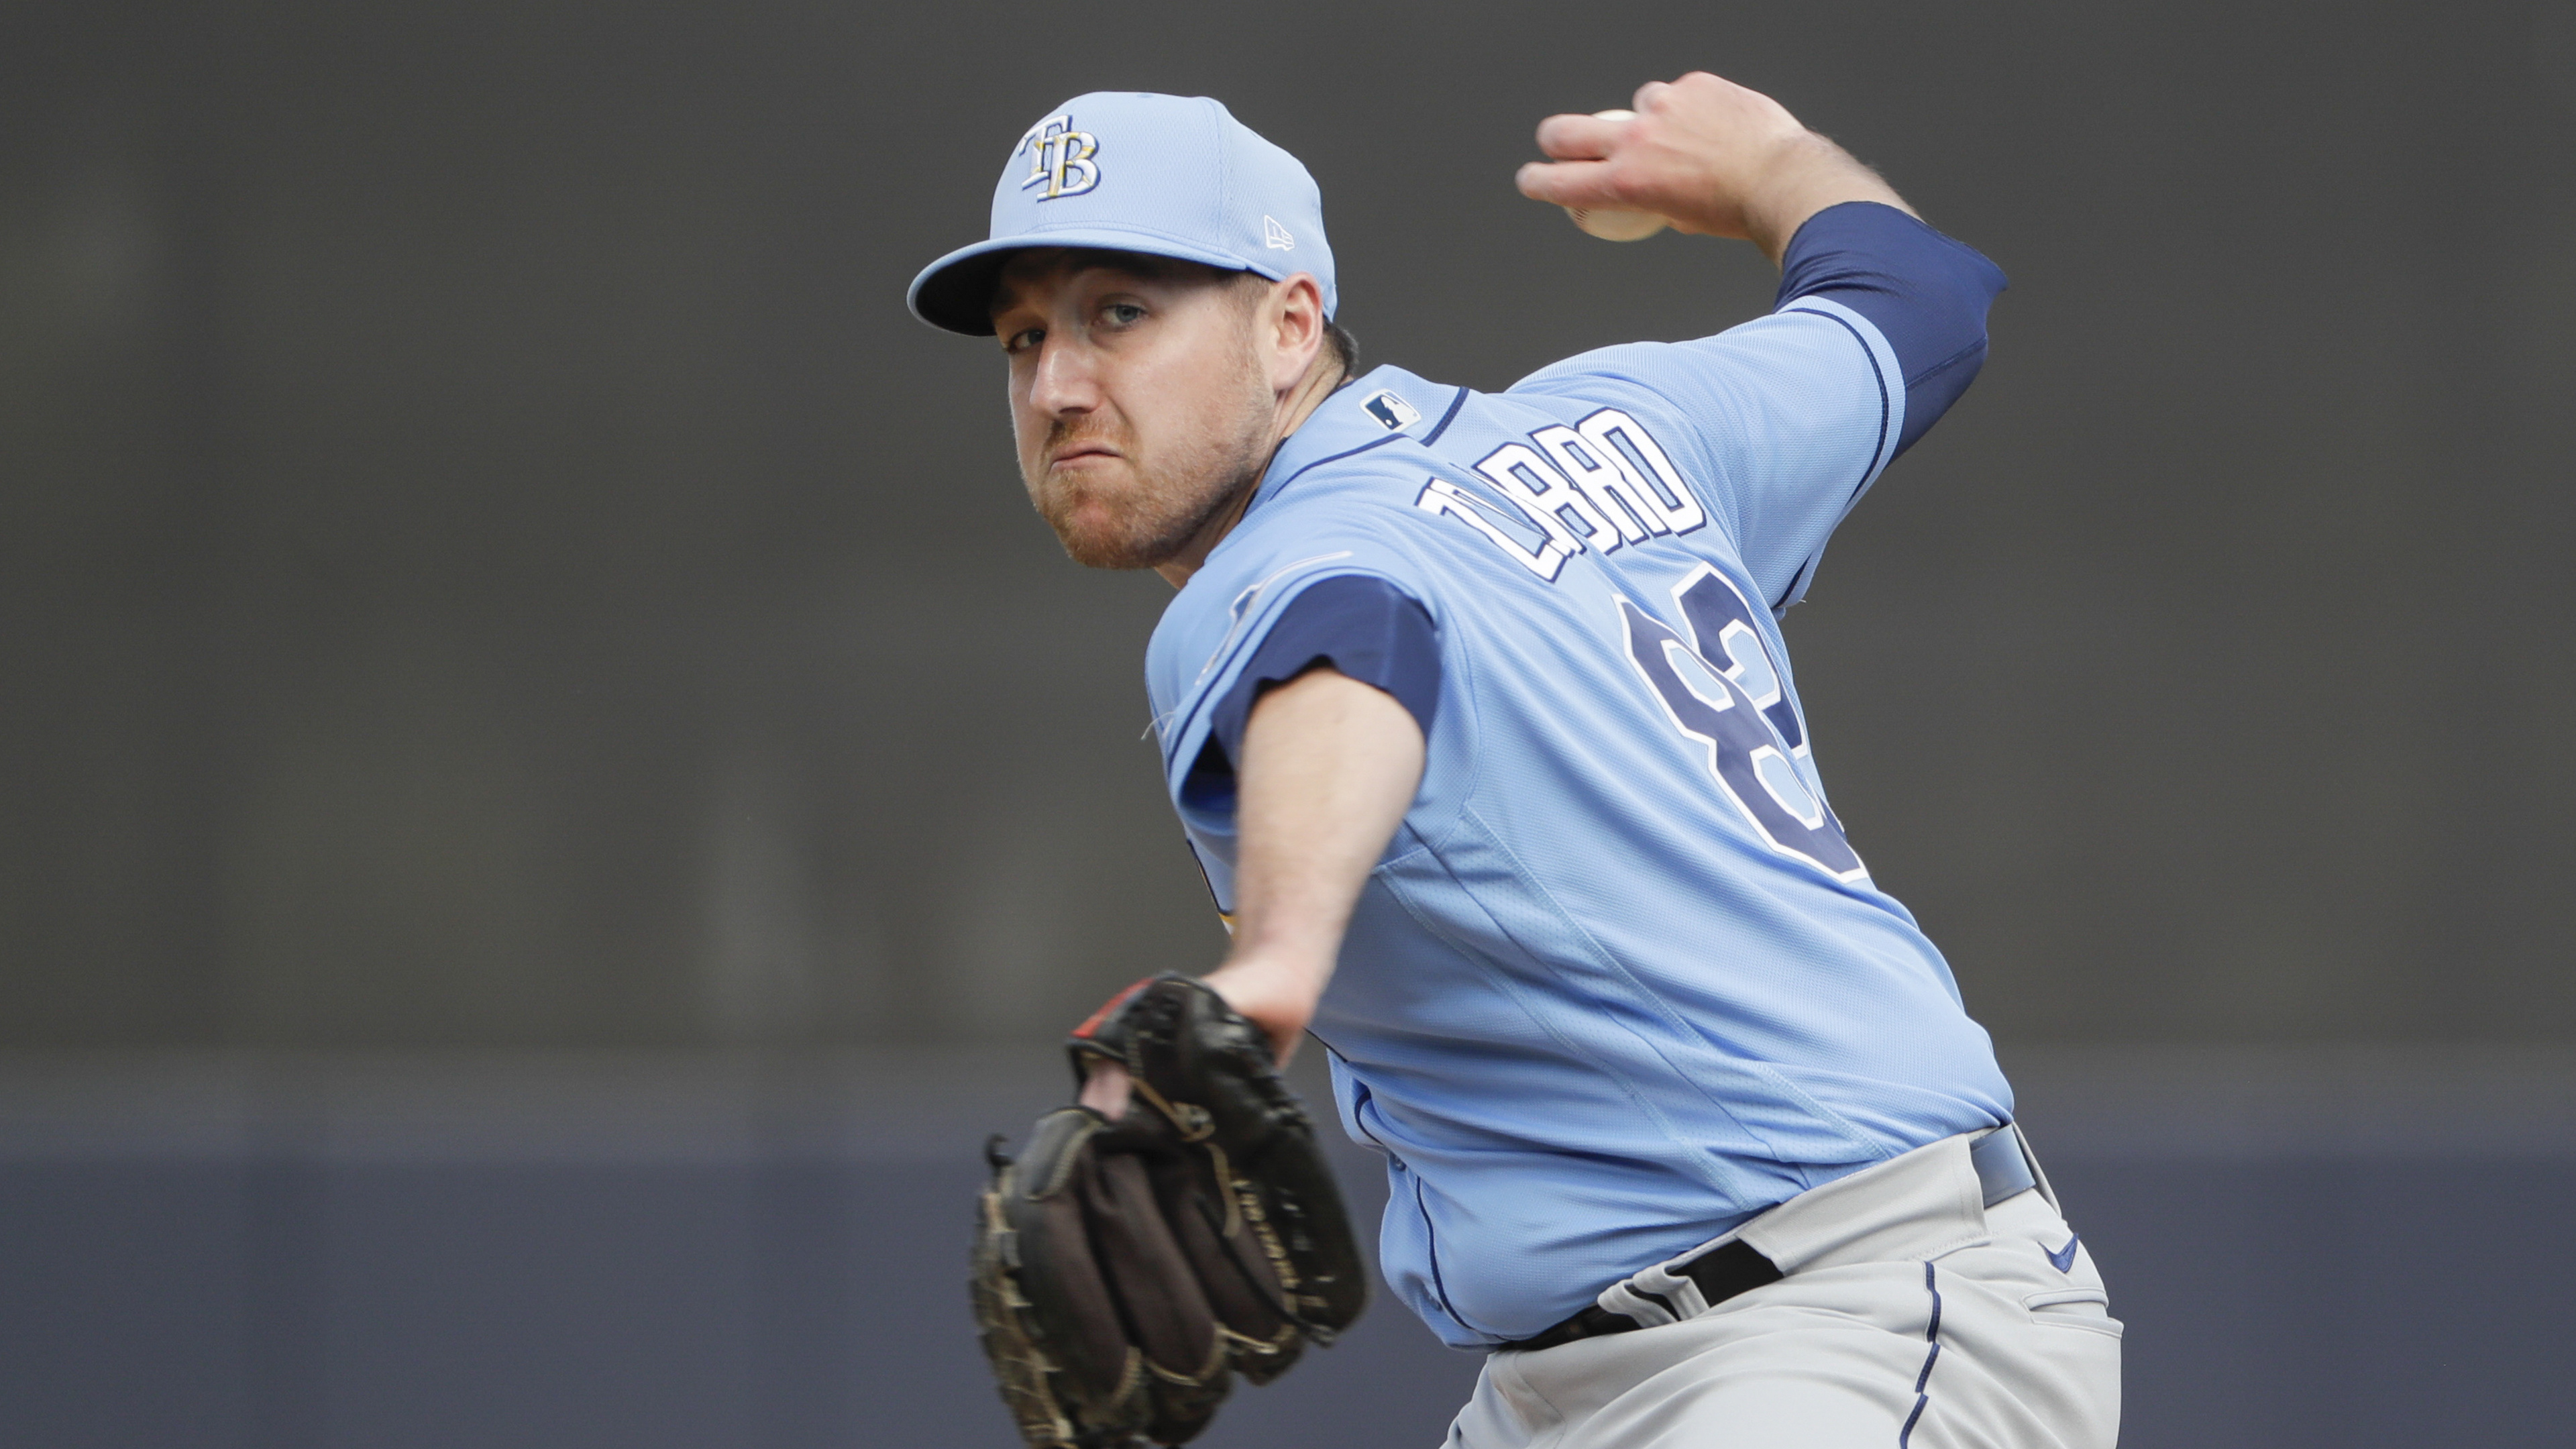 Tampa Bay Rays, Recovering pitcher, Face injury, Strong comeback, 3840x2160 4K Desktop